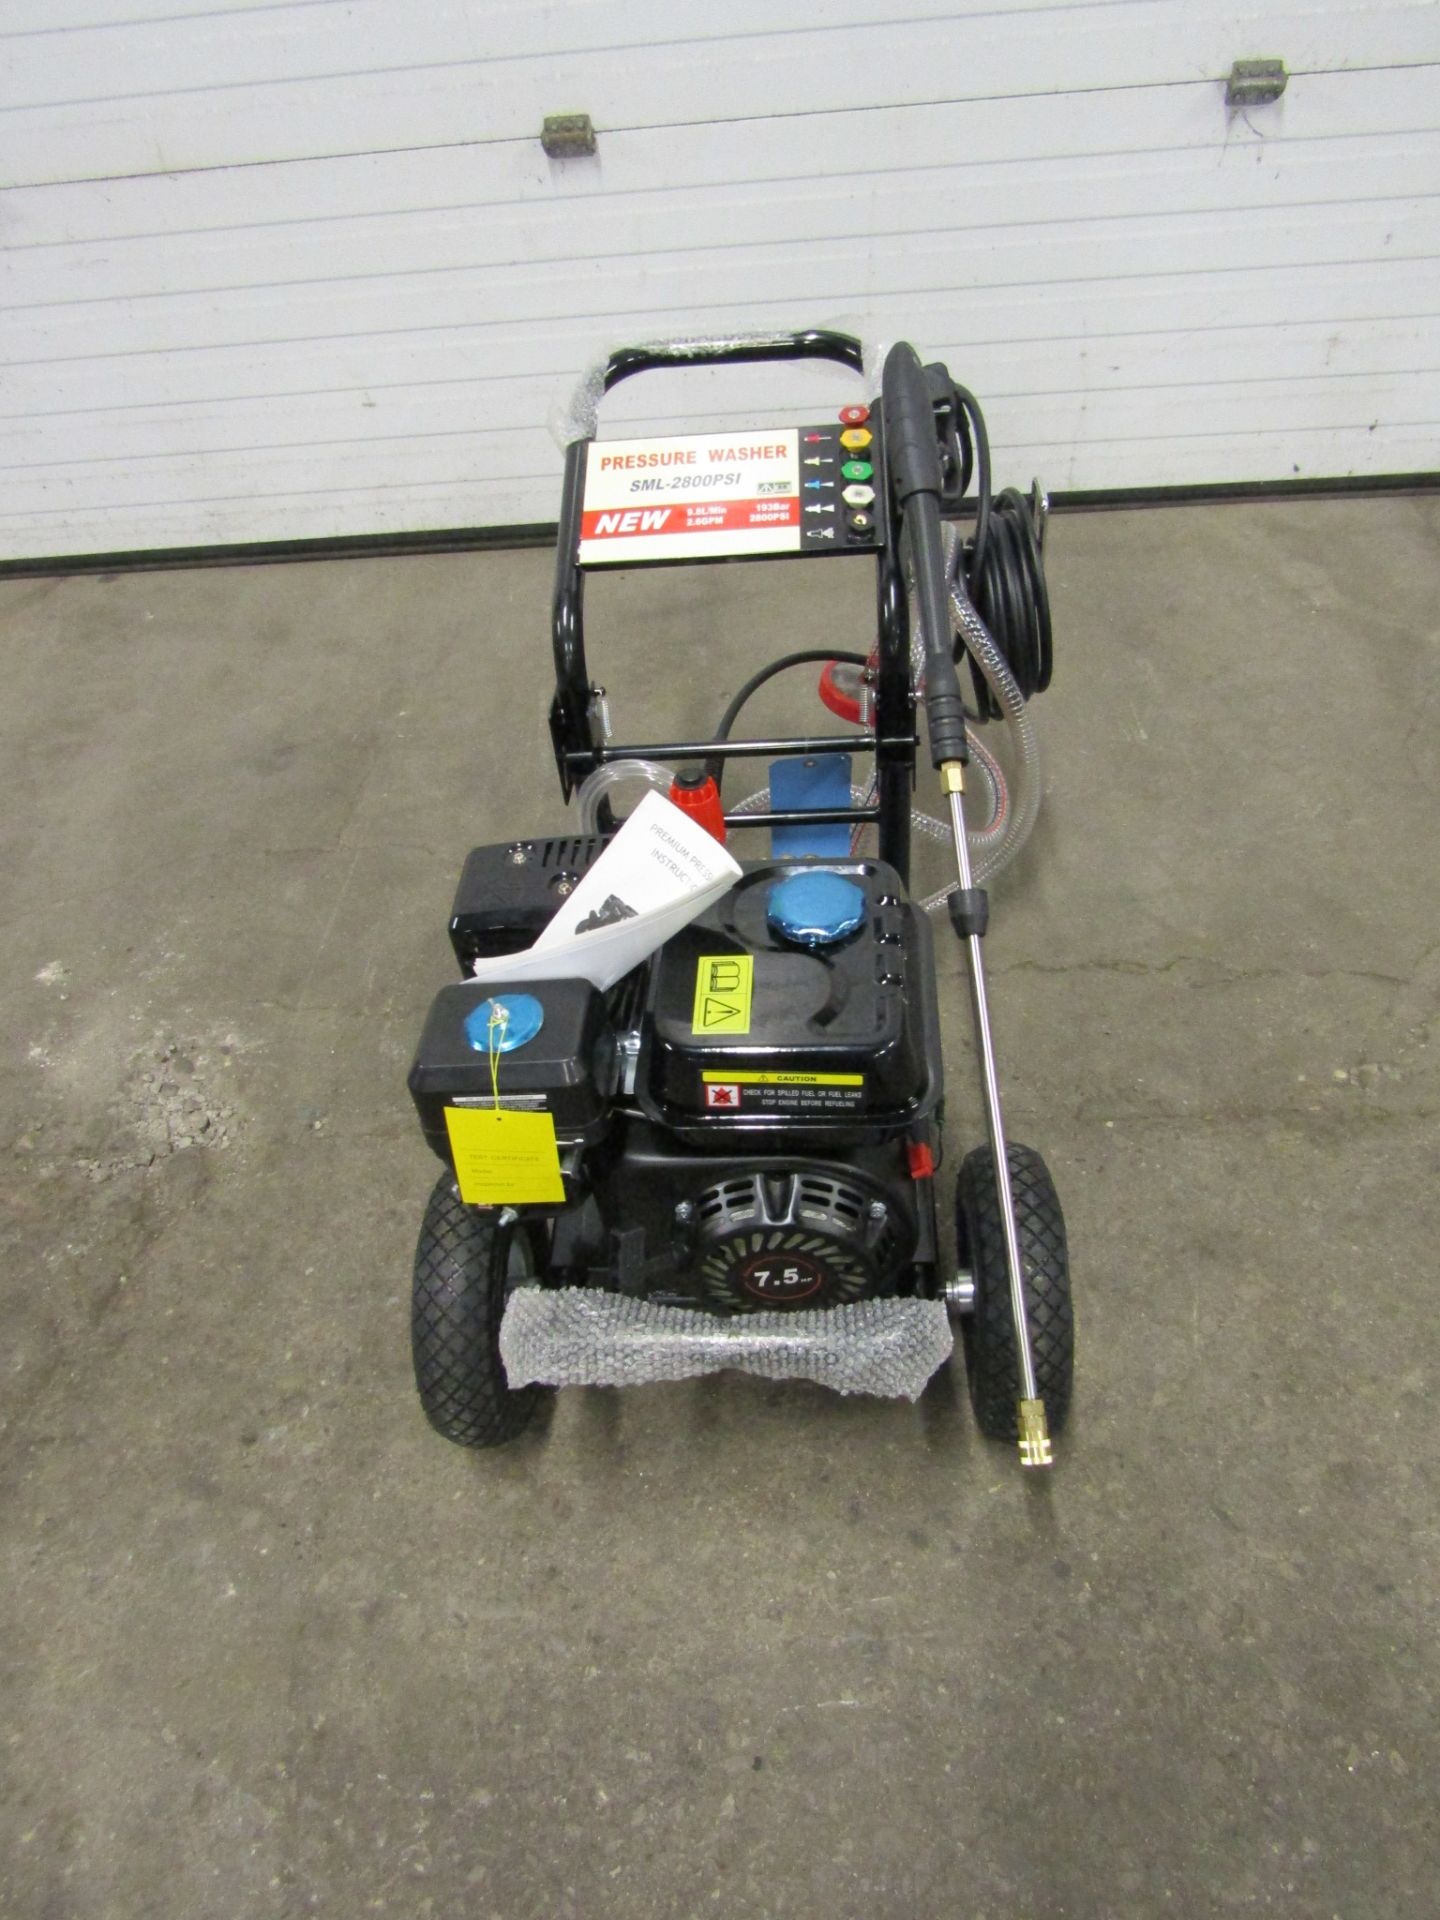 Brand New Pressure Power Washer - Gas Powered Unit 2800PSI - Variable Speed 2.6GPM with various - Bild 2 aus 3